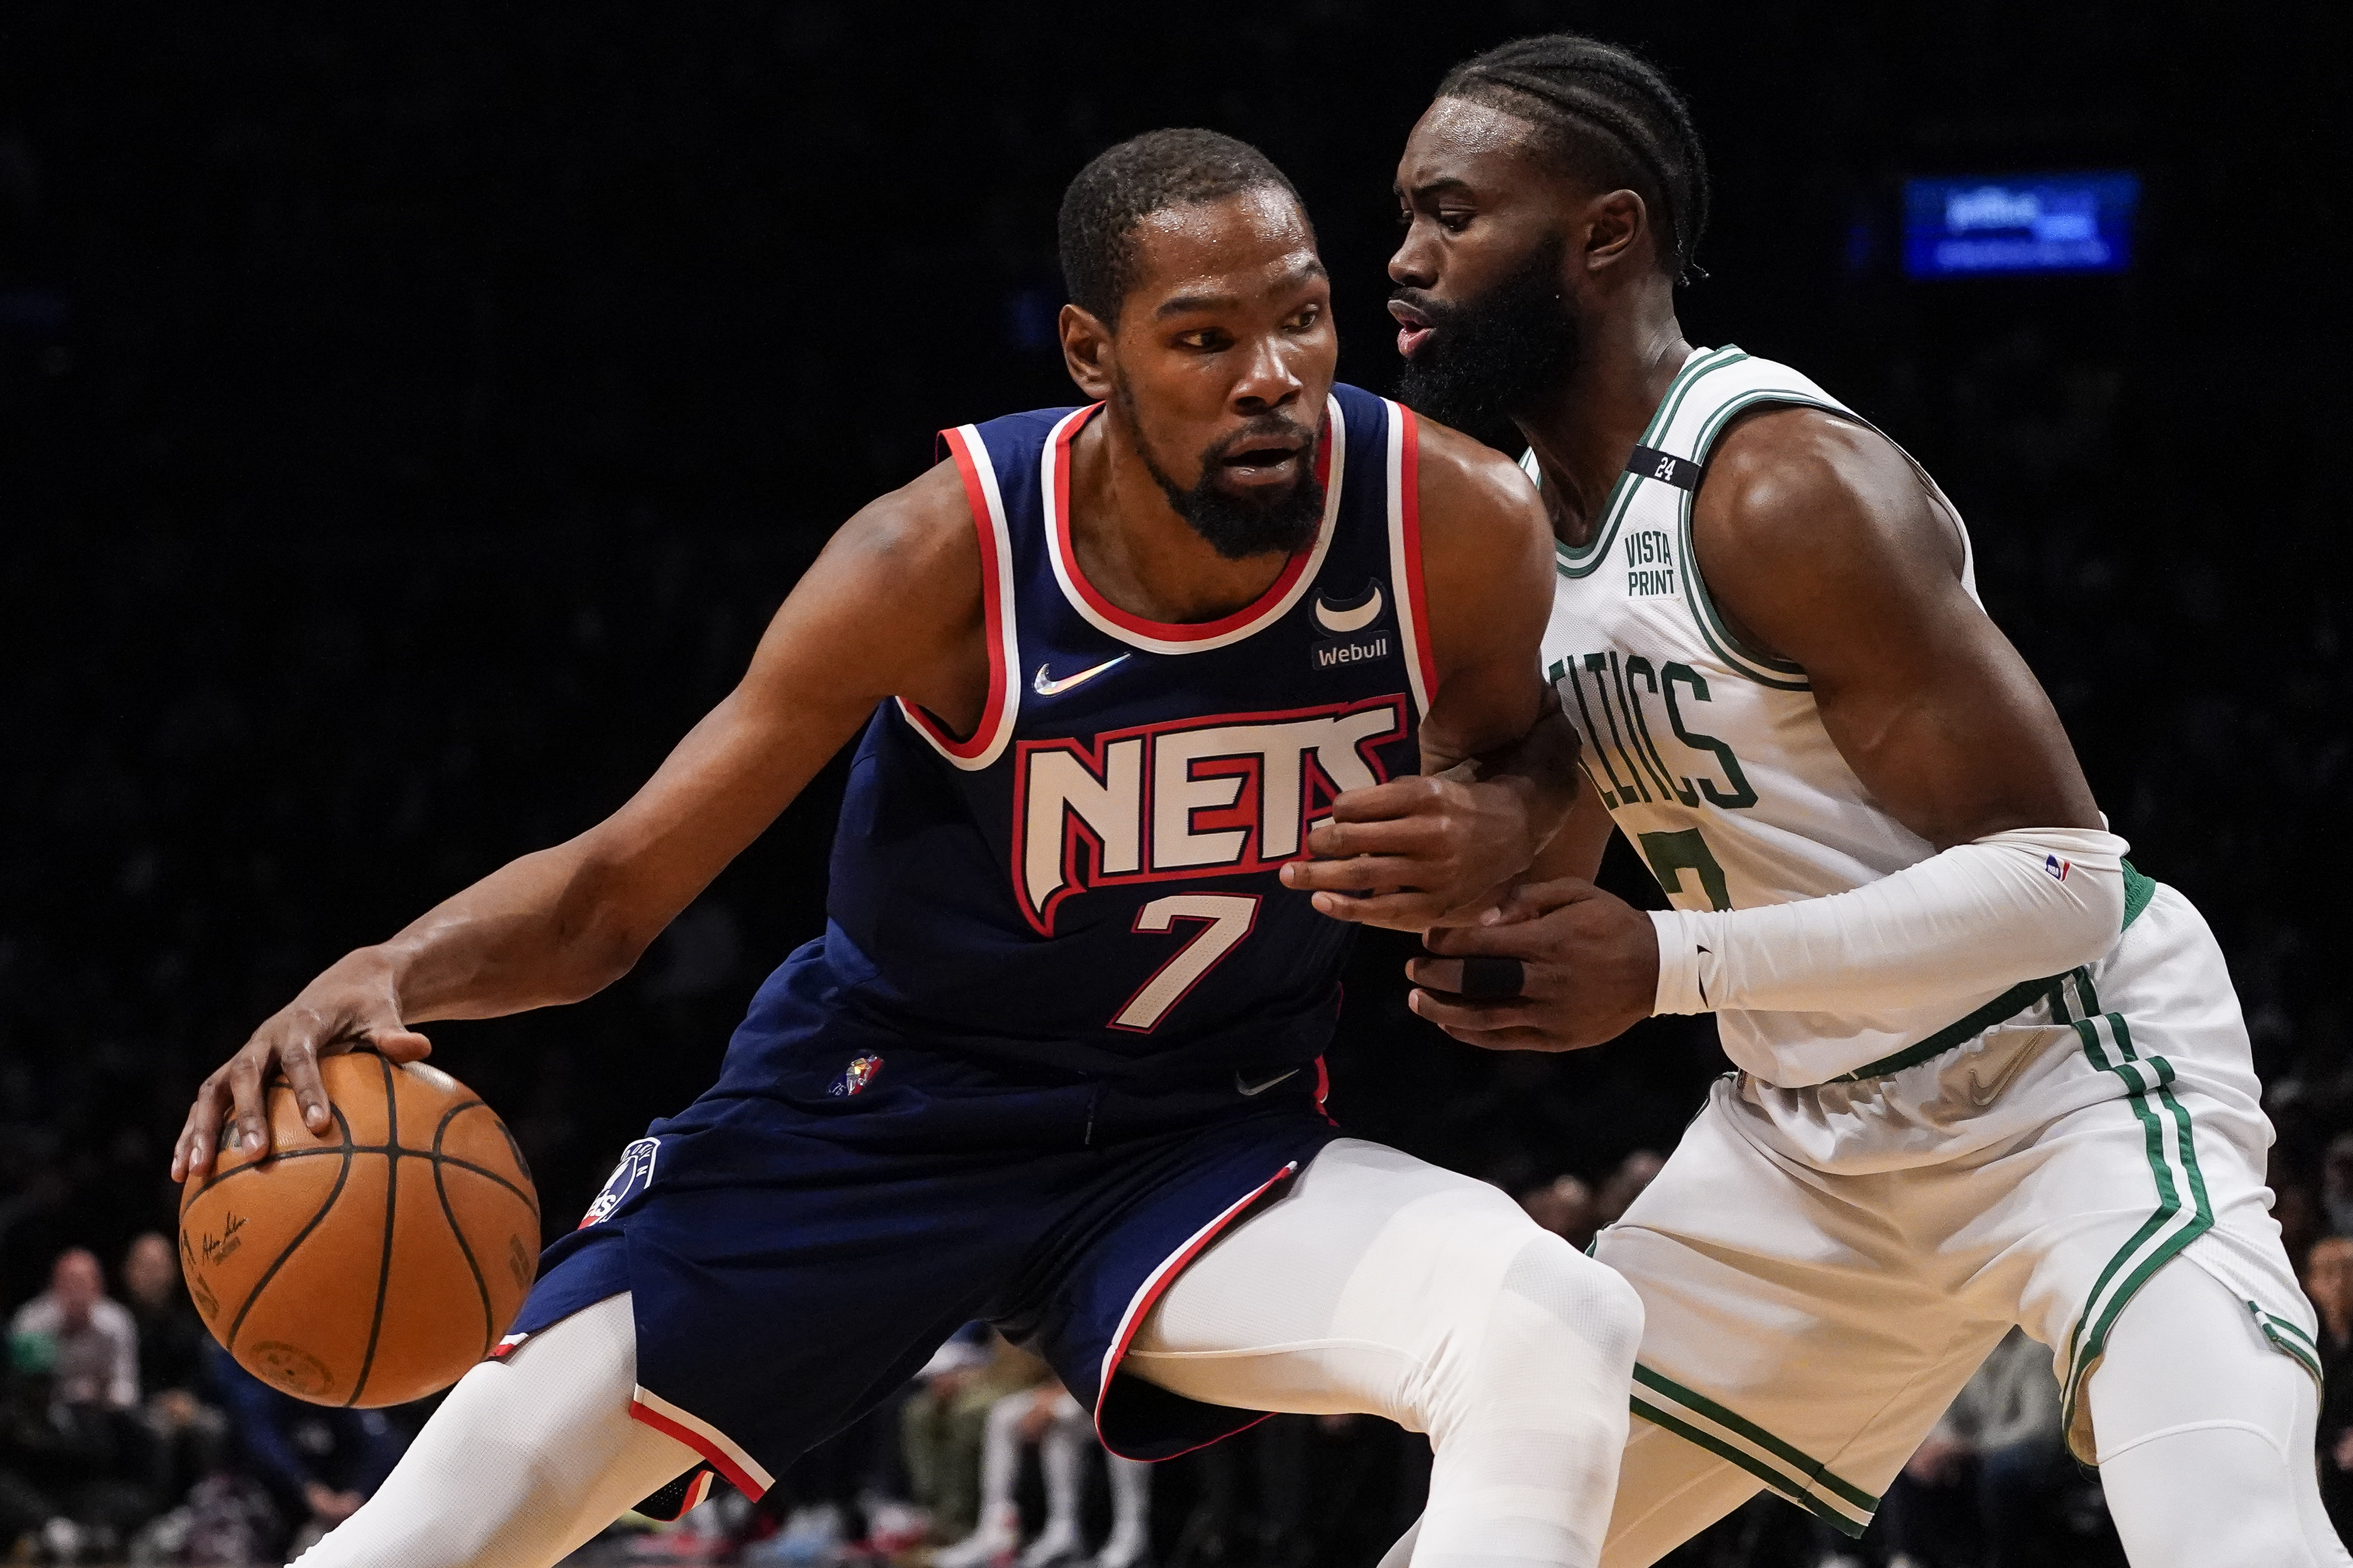 Kevin Durant Reiterates Trade Request to Nets in Meeting - Blazer's Edge